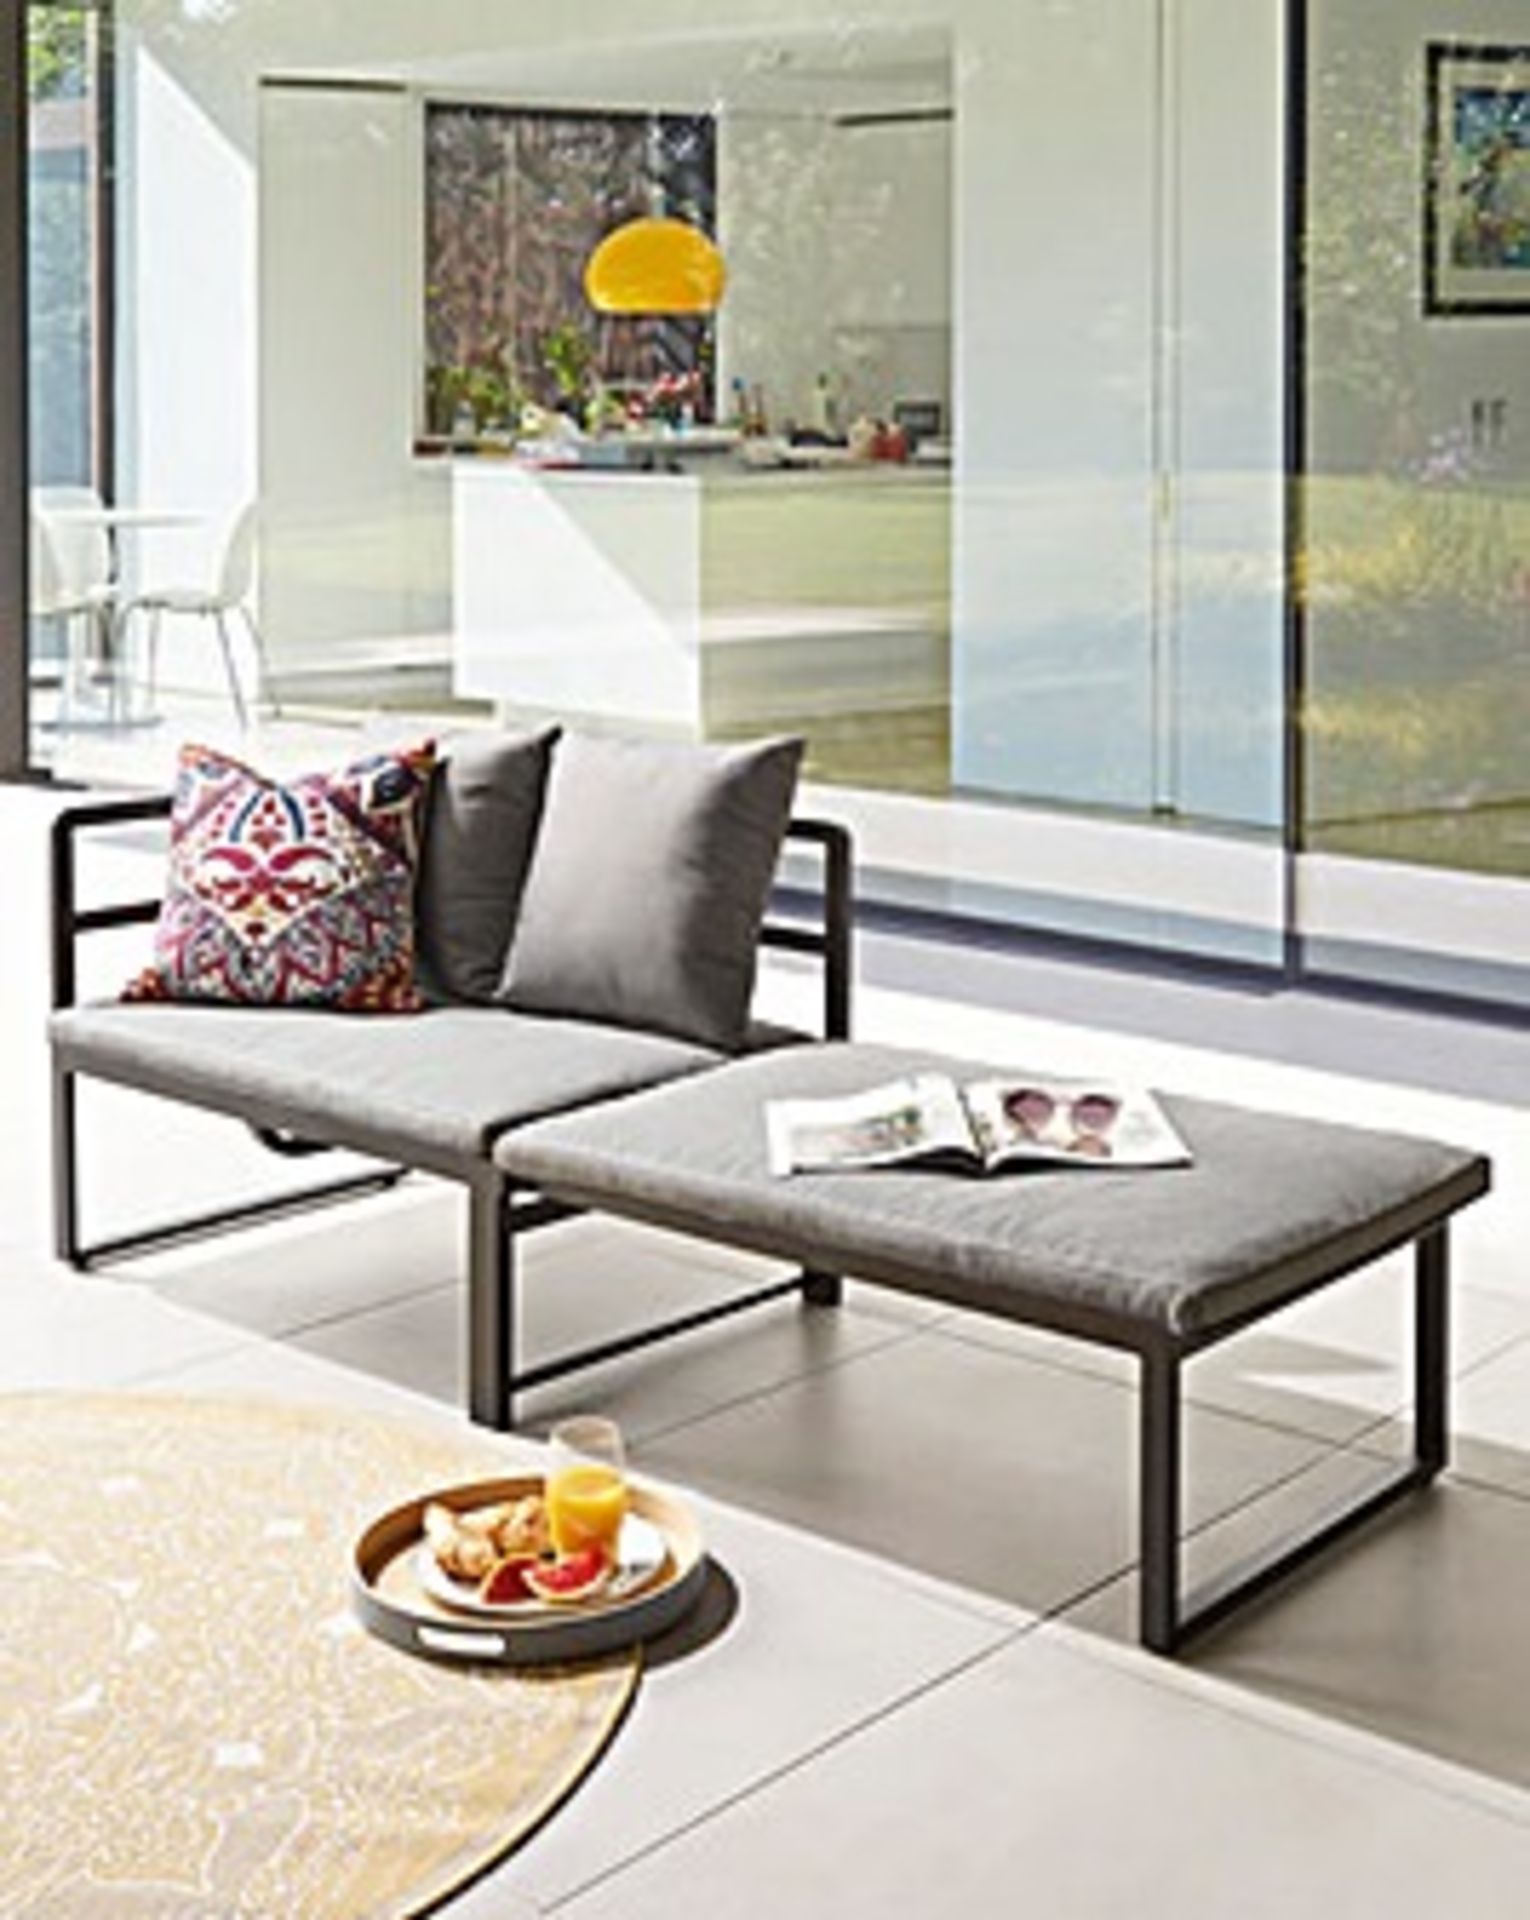 20 X BRAND NEW LUXURY EXTENDABLE PATIO BENCH. RRP £225. This contemporary extendable bench is a